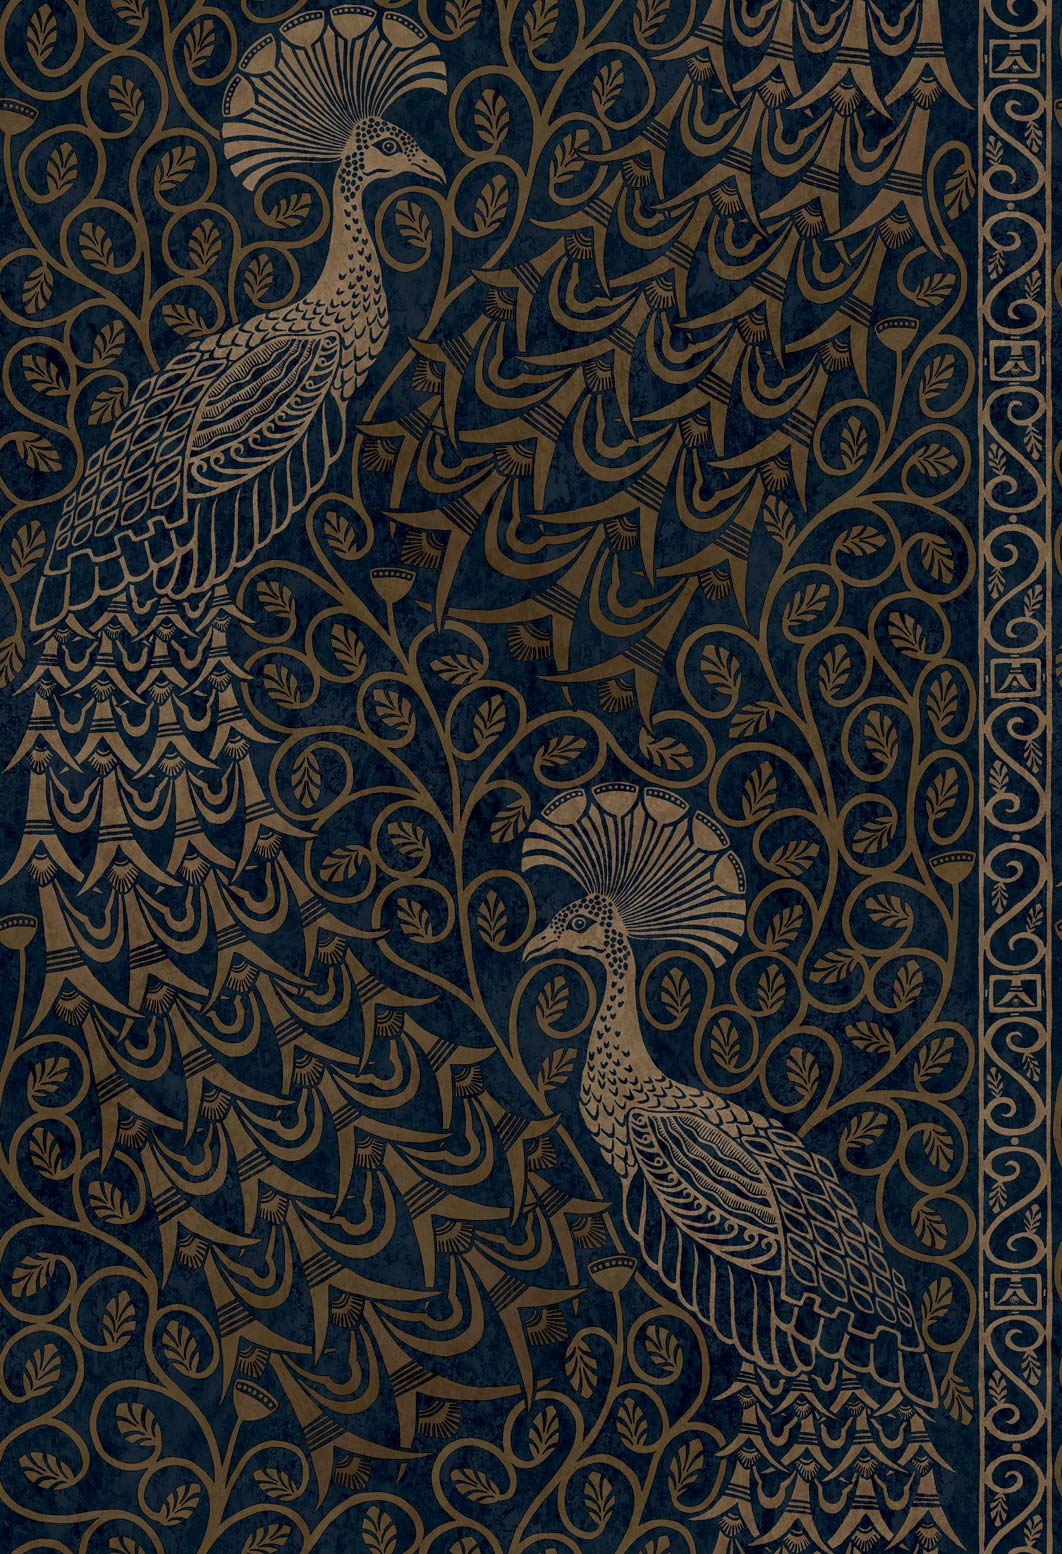 Wallpaper - Cole and Son - Pearwood - Pavo Parade - Metallic Bronze on Midnight